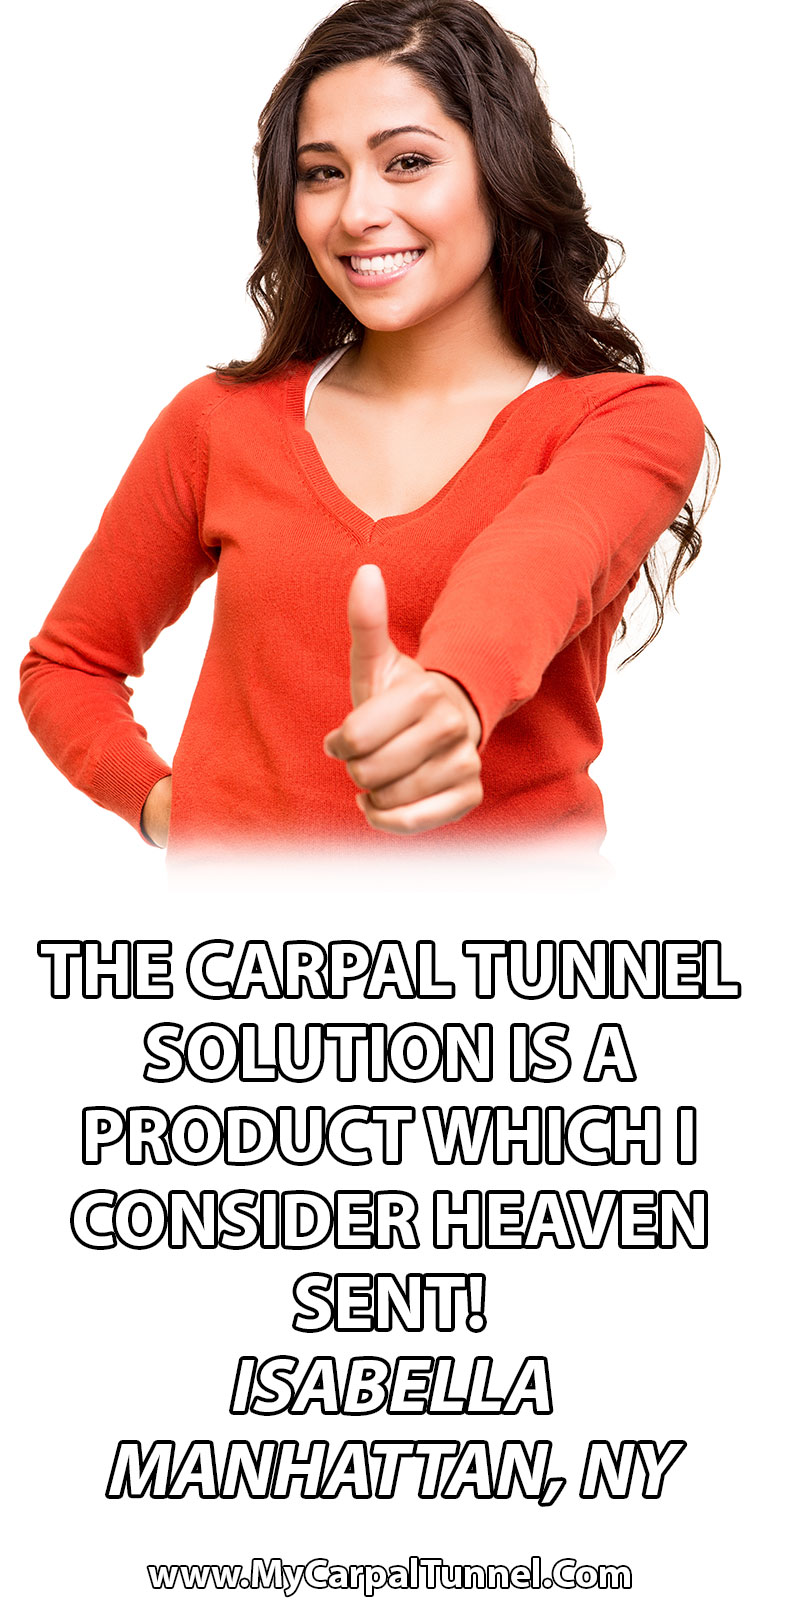 The Carpal Tunnel Solution is a product which I consider heaven sent